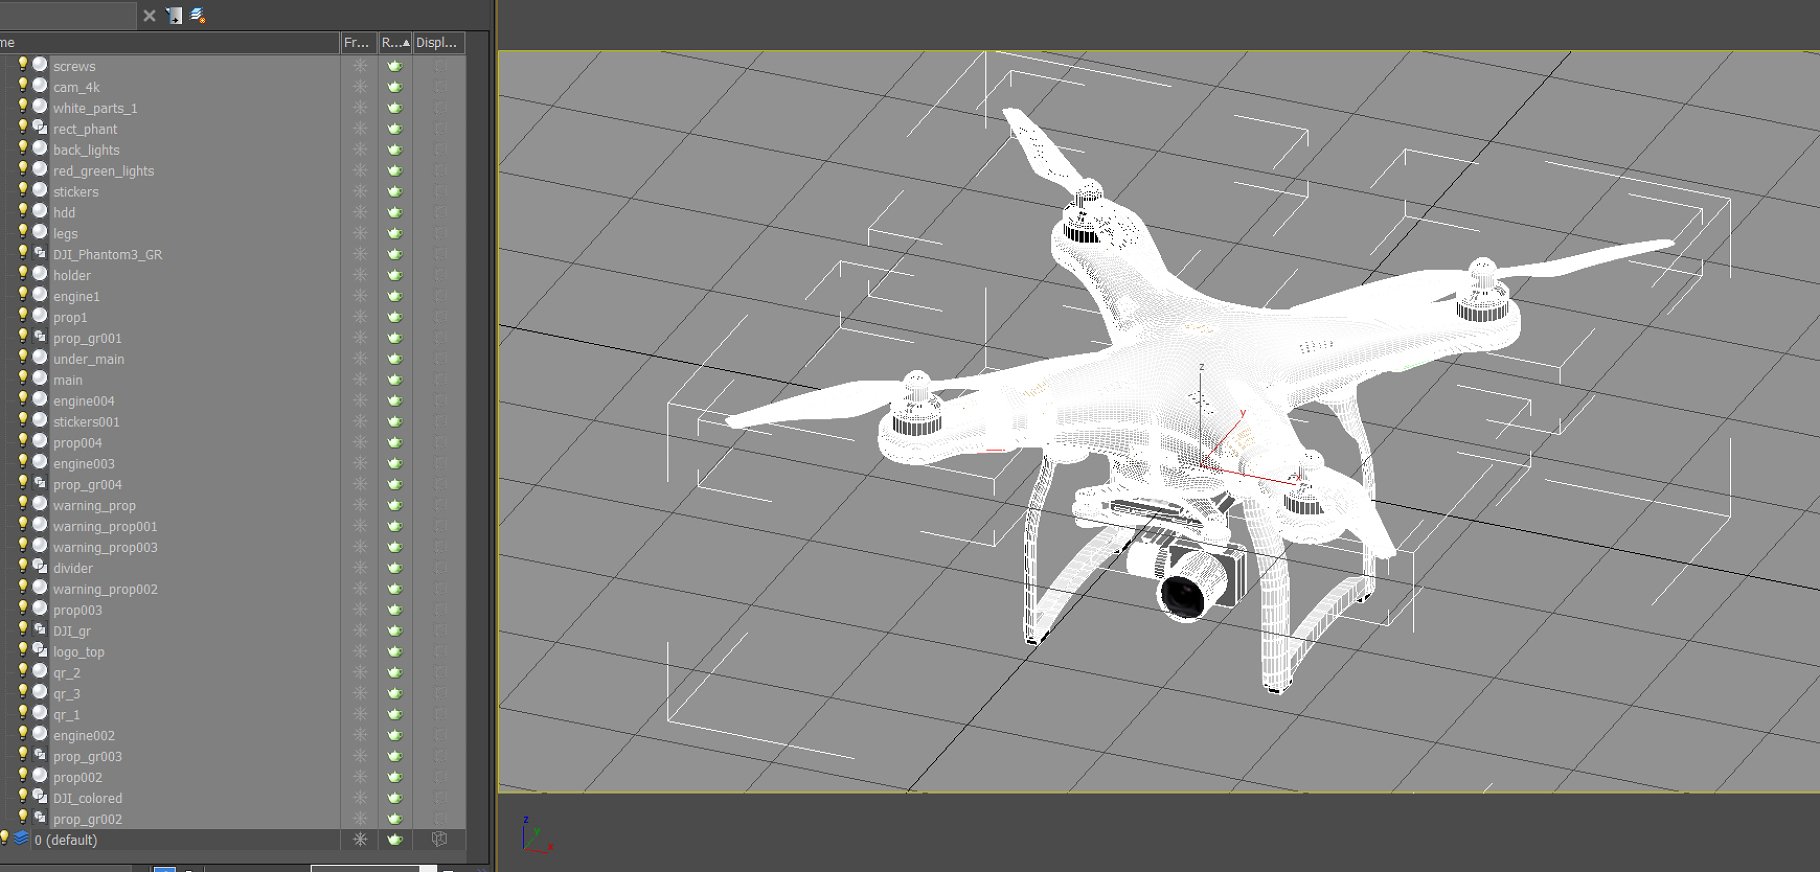 Image 3d model of a white DJI Phantom 3 drone in the software